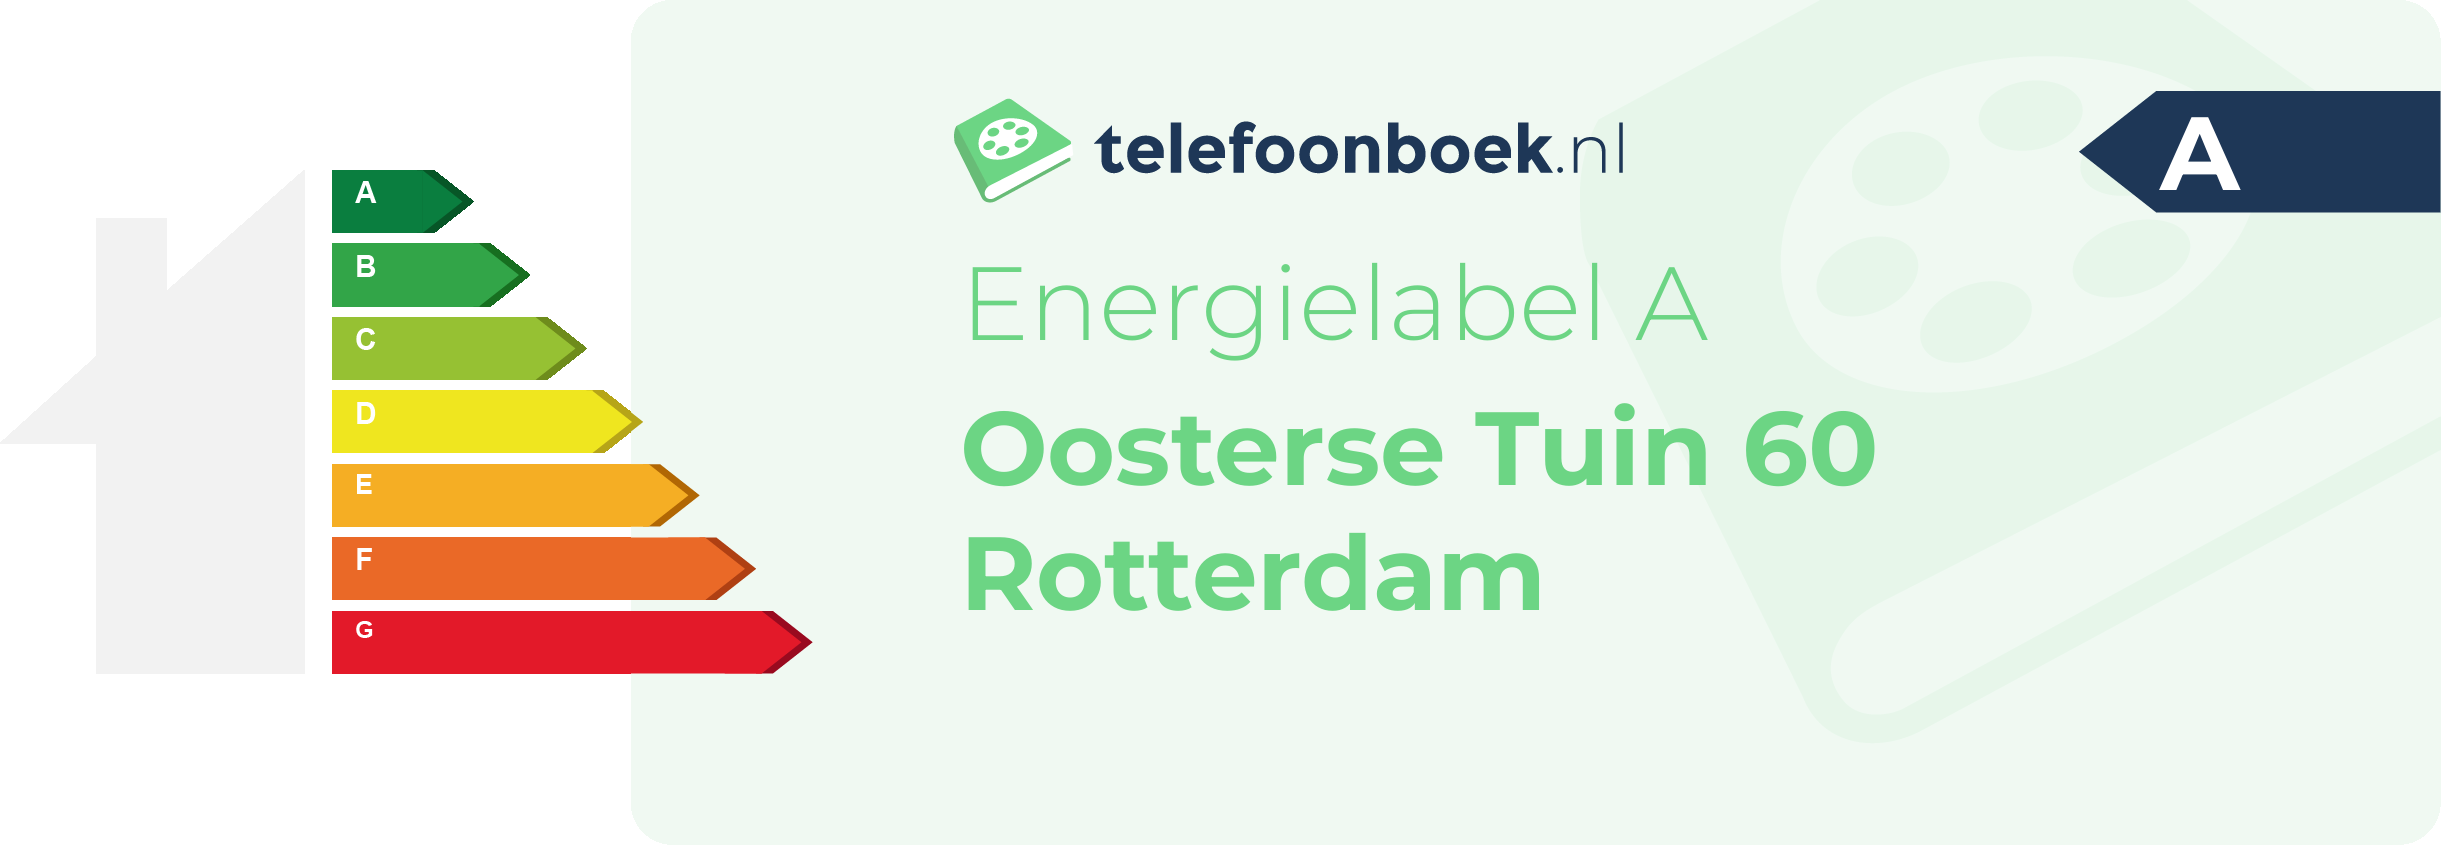 Energielabel Oosterse Tuin 60 Rotterdam